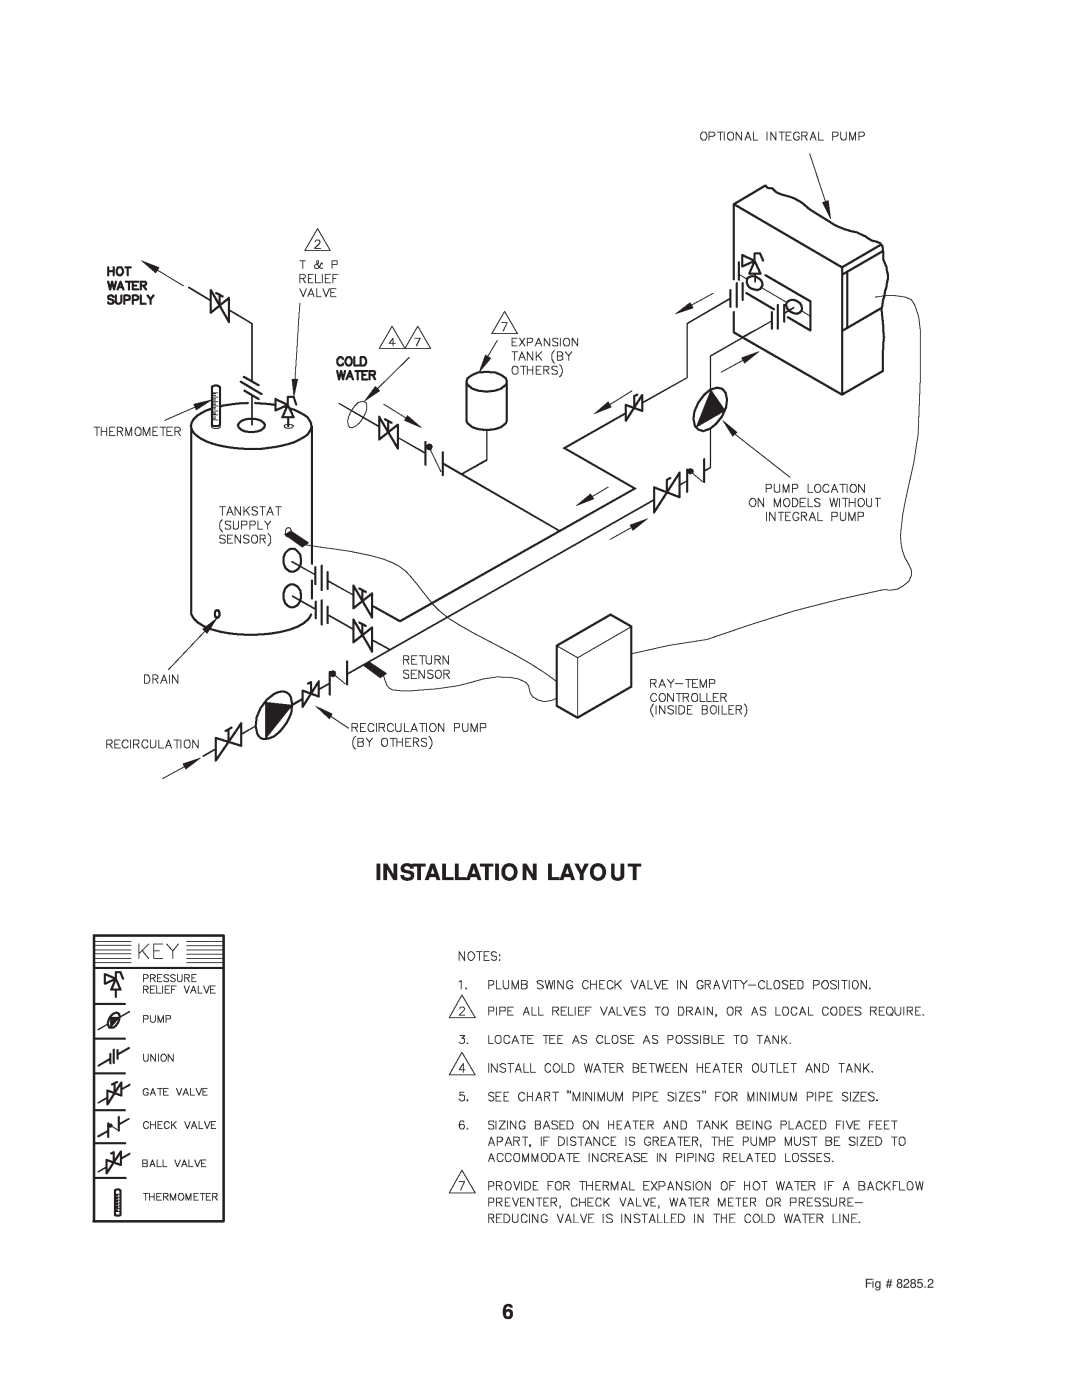 Raypak Hot Water Energy Management Control manual Installation Layout, Fig # 